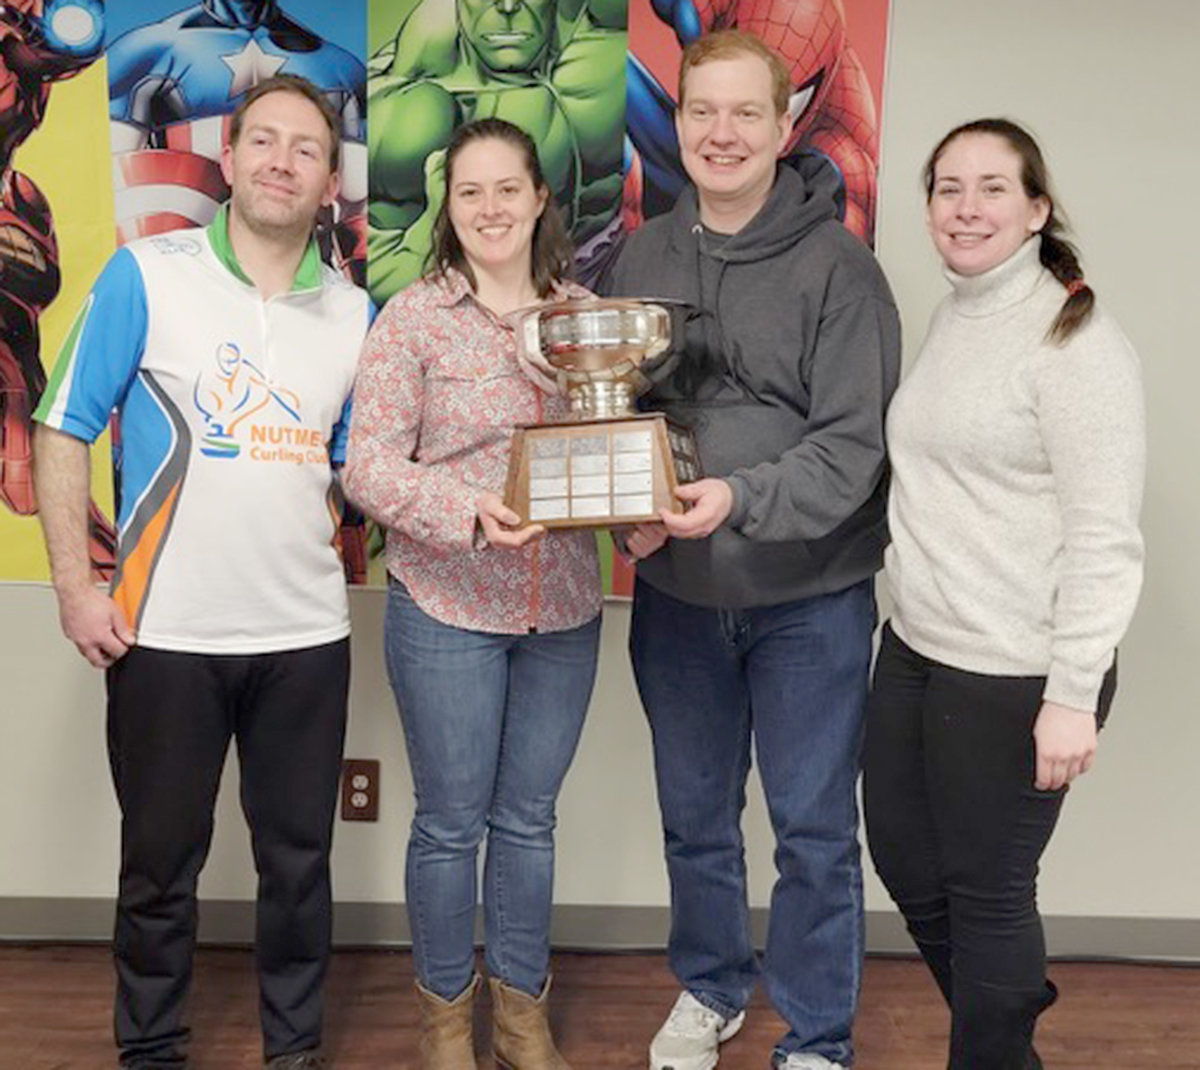 PRESIDENT’S CUP WINNER — A team from the Nutmeg Curling Club of Connecticut defeated Utica 1 by a score of 7-4 on Sunday, Feb. 20 at the Utica Curling Club’s Cobb Mixed International Bonspiel to win the President’s Bowl in the A Event. From left: Jonathan Carelli, Rebecca Andrew, Ed Scimia, and Allison Kenney.